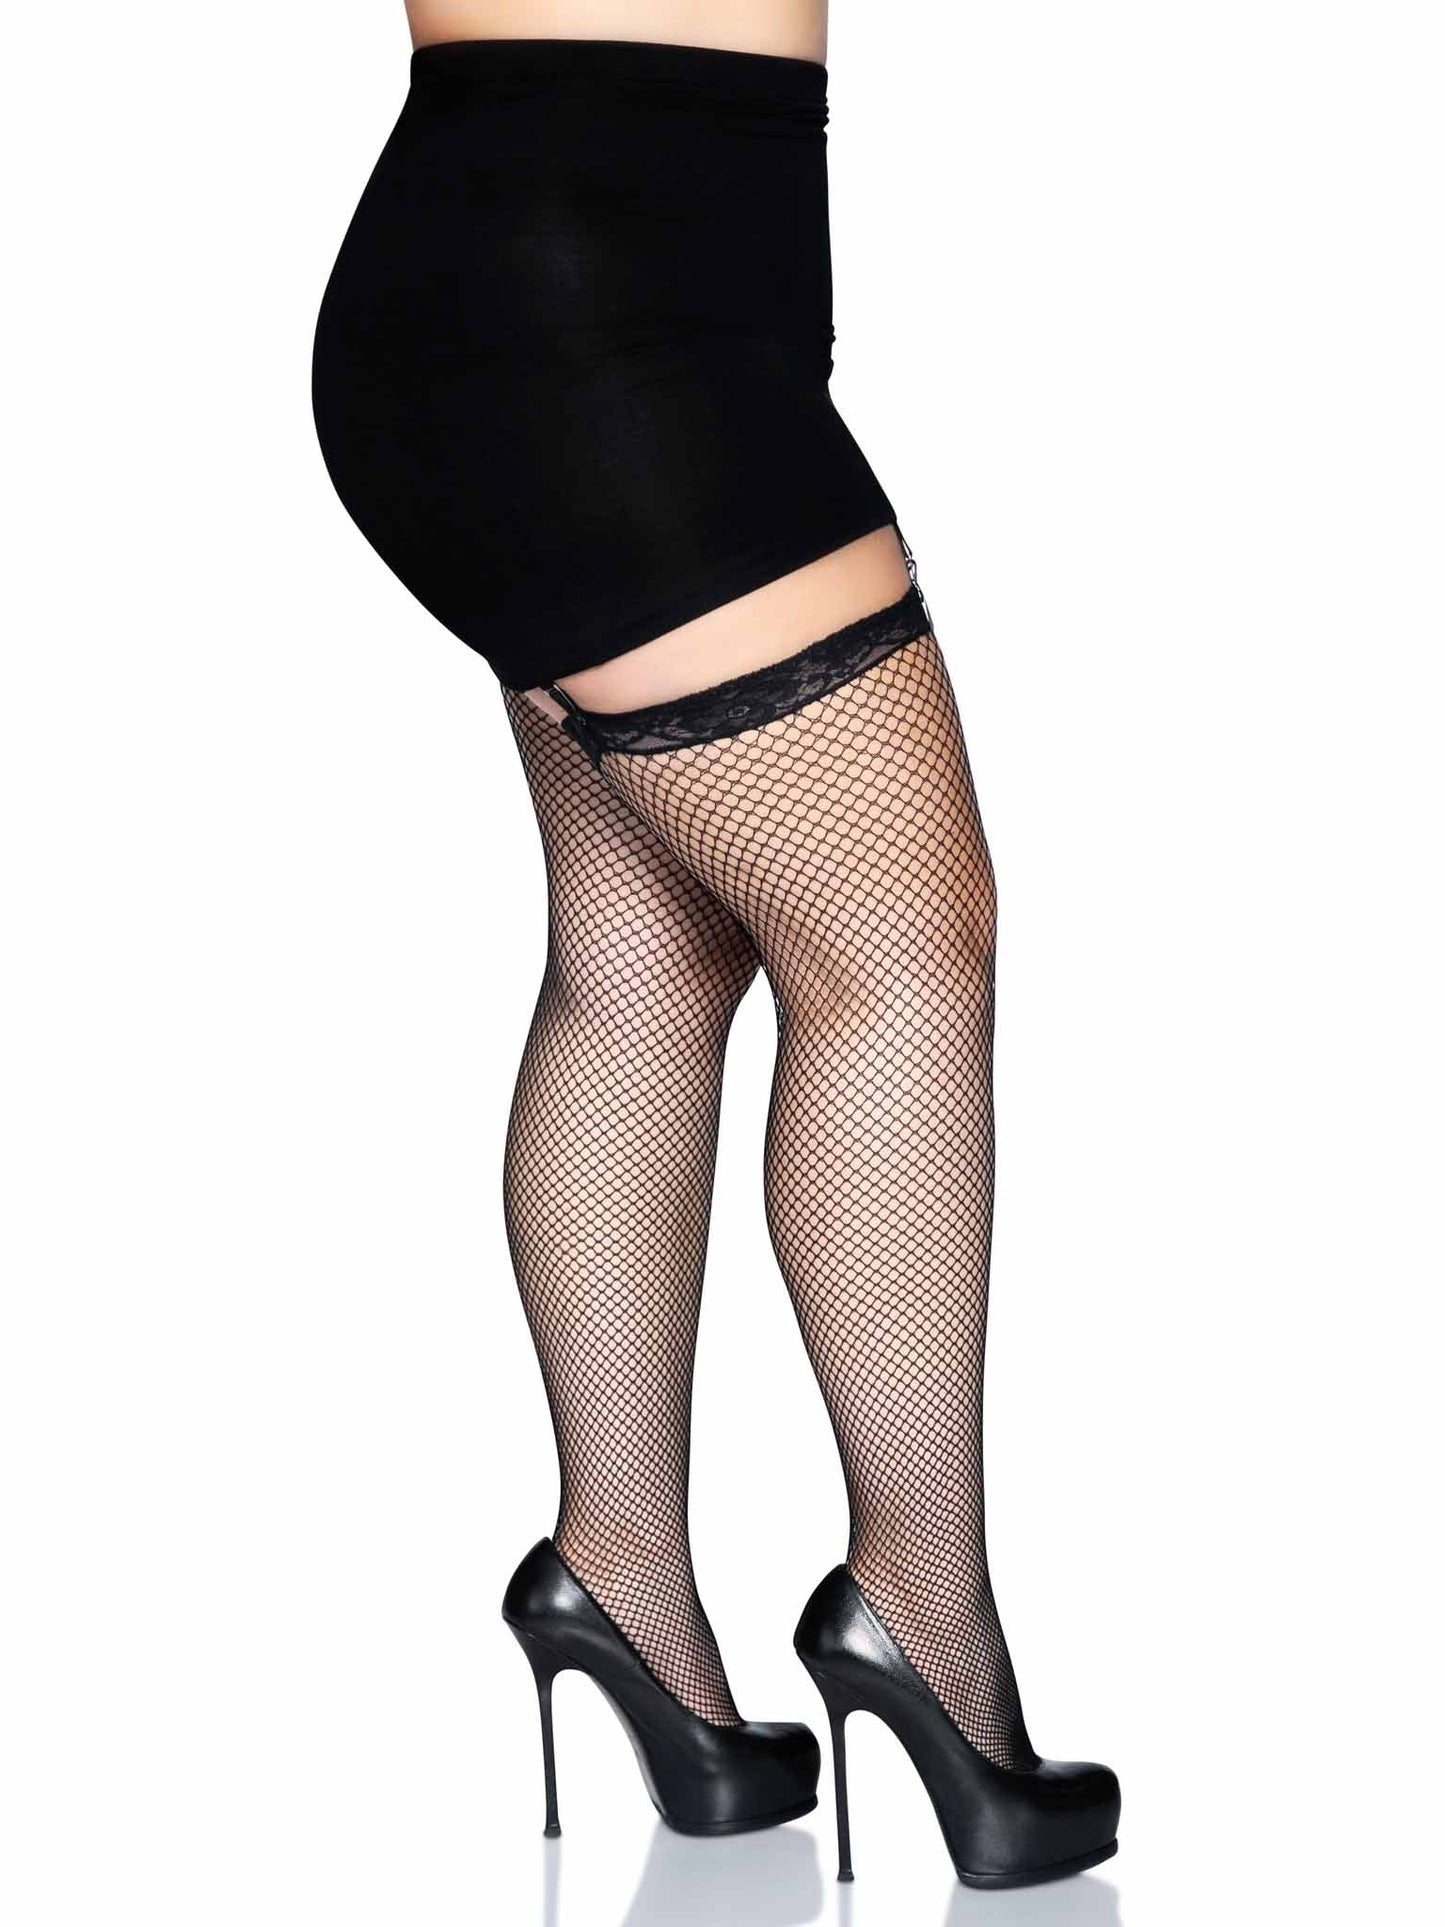 Load image into Gallery viewer, Plus Size Fishnets With Garter Belt
